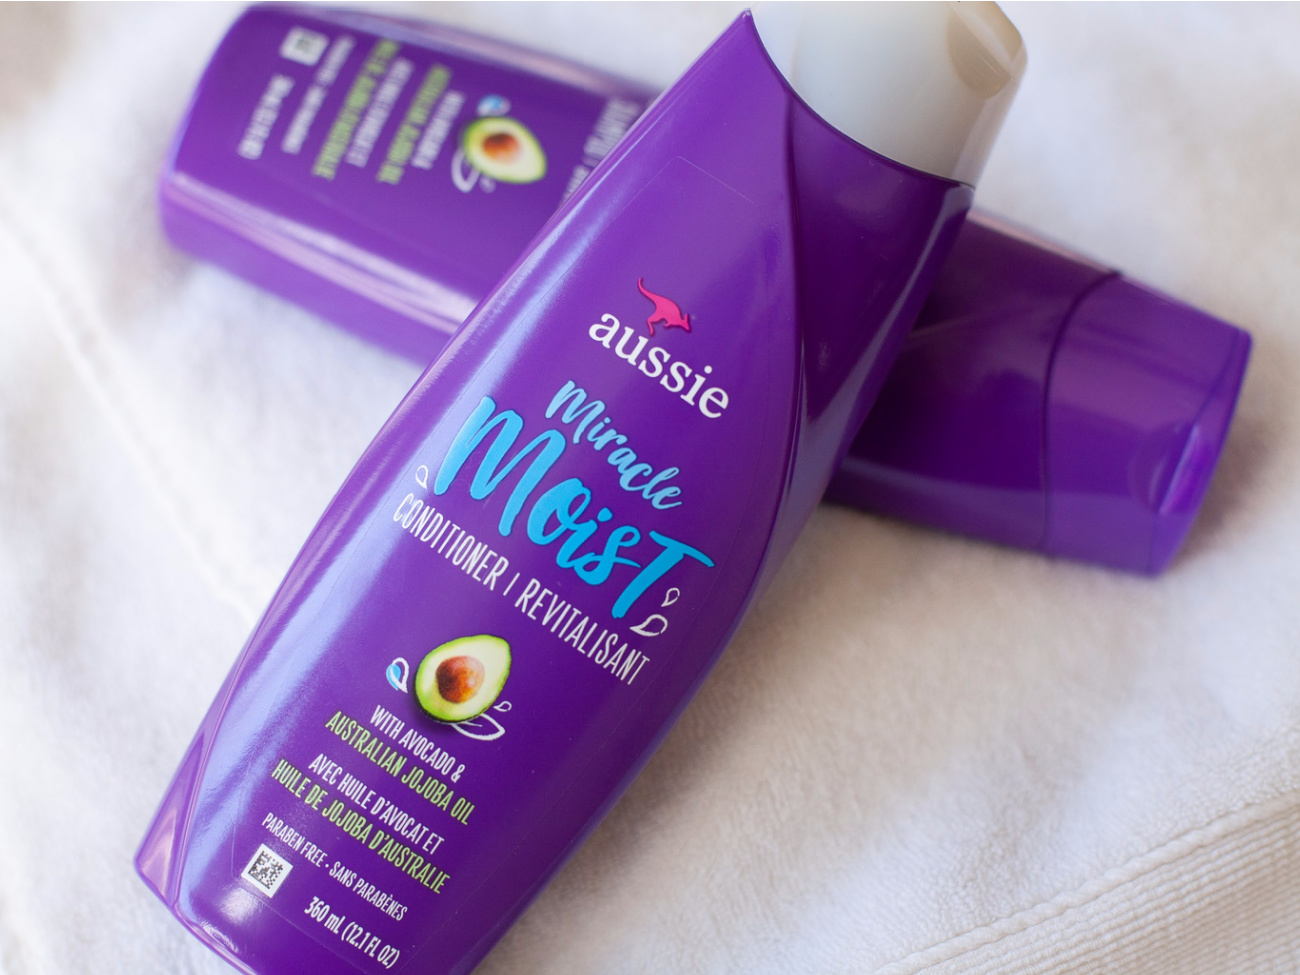 Aussie Hair Care As Low As $2.99 Per Bottle At Kroger